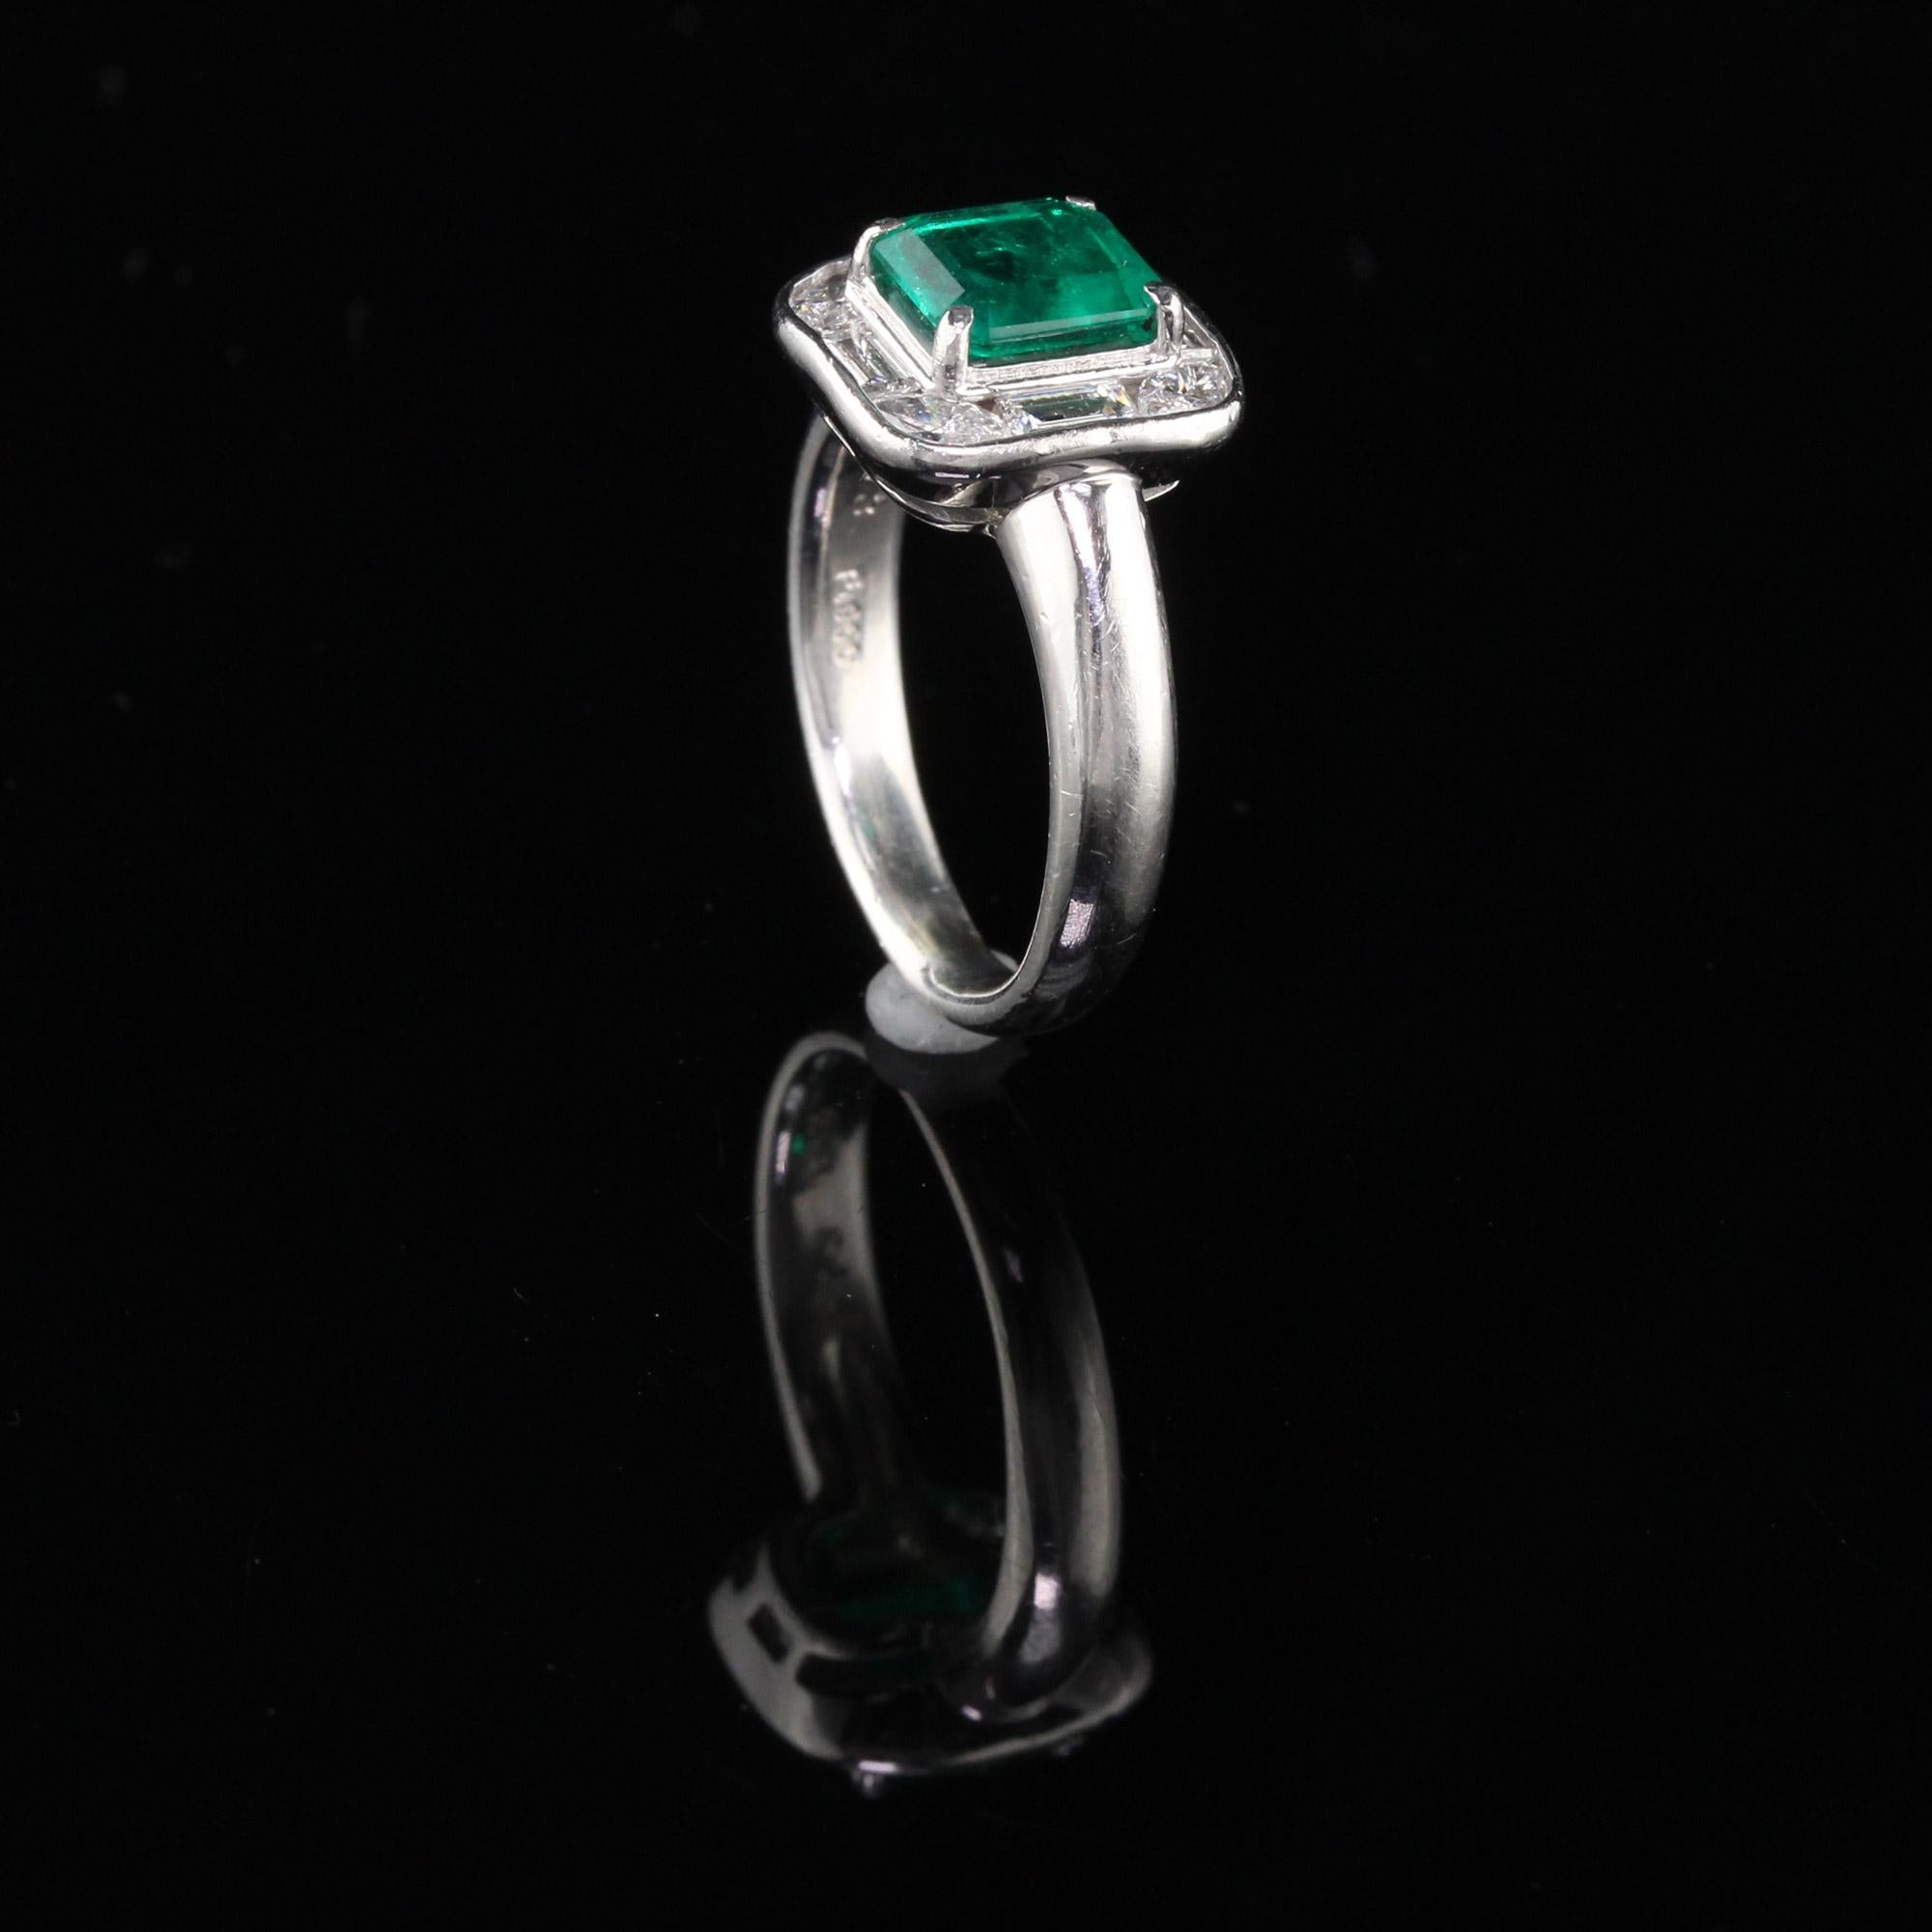 Women's Vintage Estate Platinum Colombian Emerald and Diamond Ring, GIA Certified